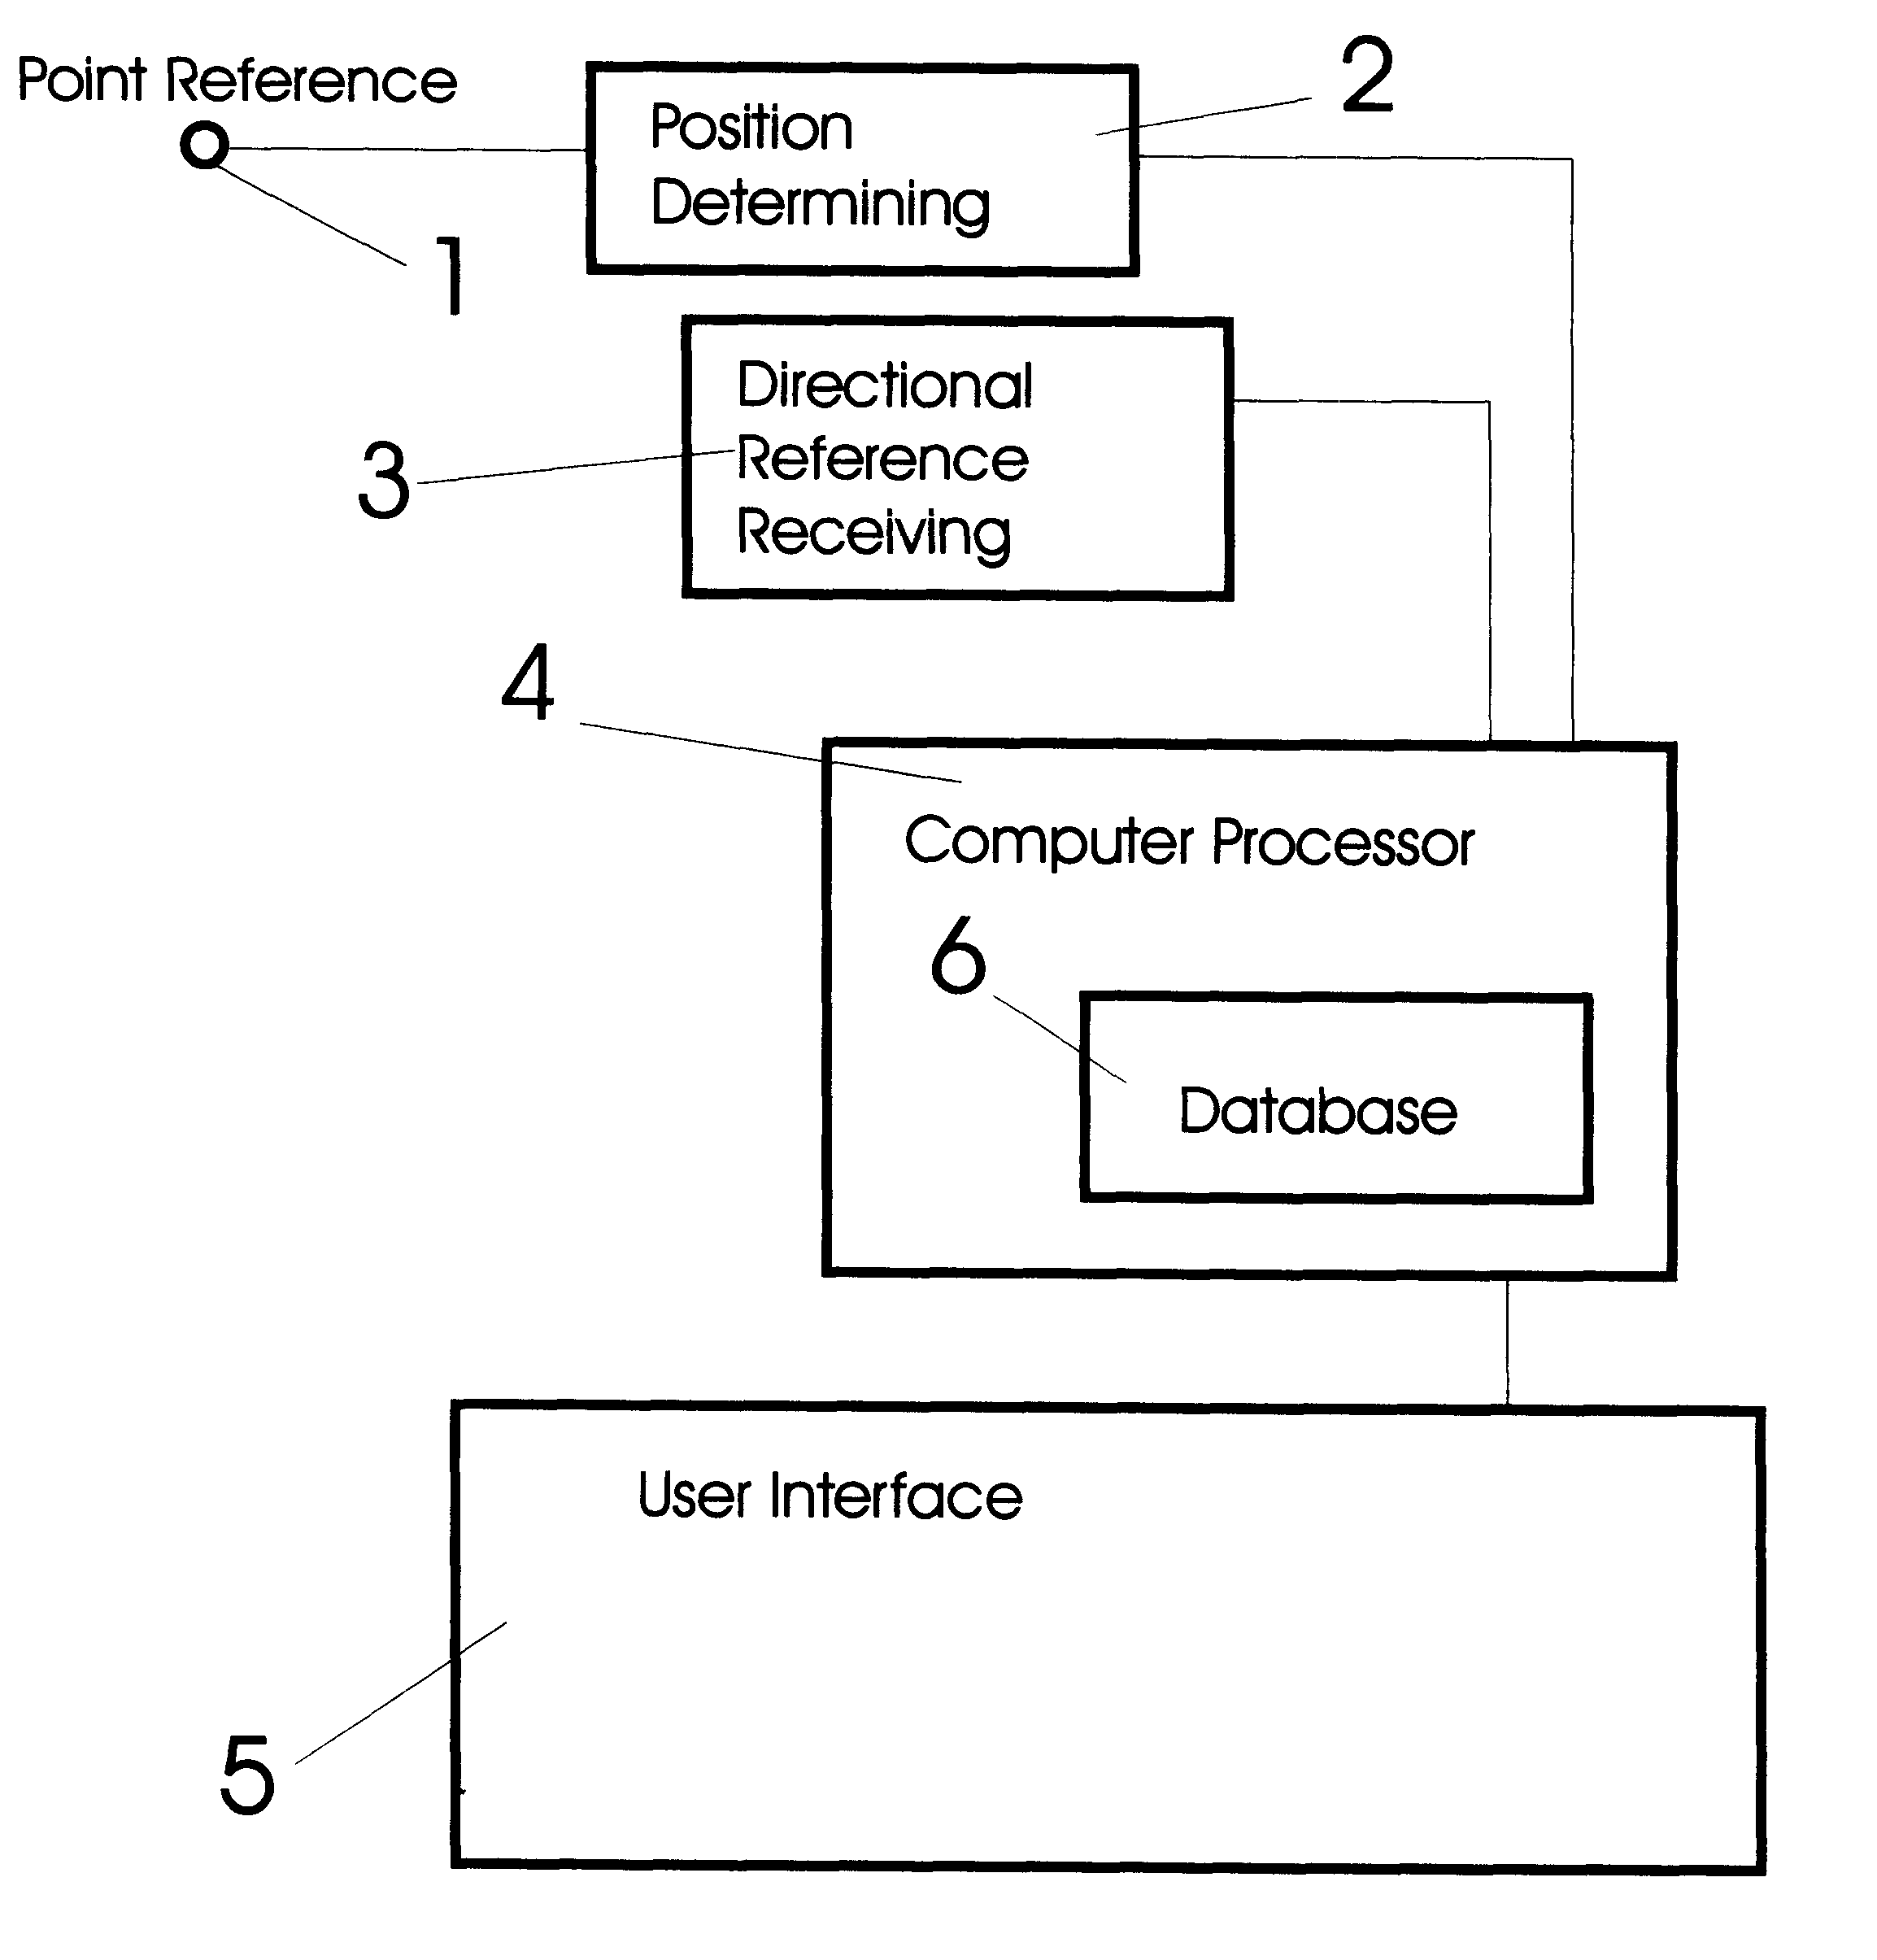 Information systems having position measuring capacity